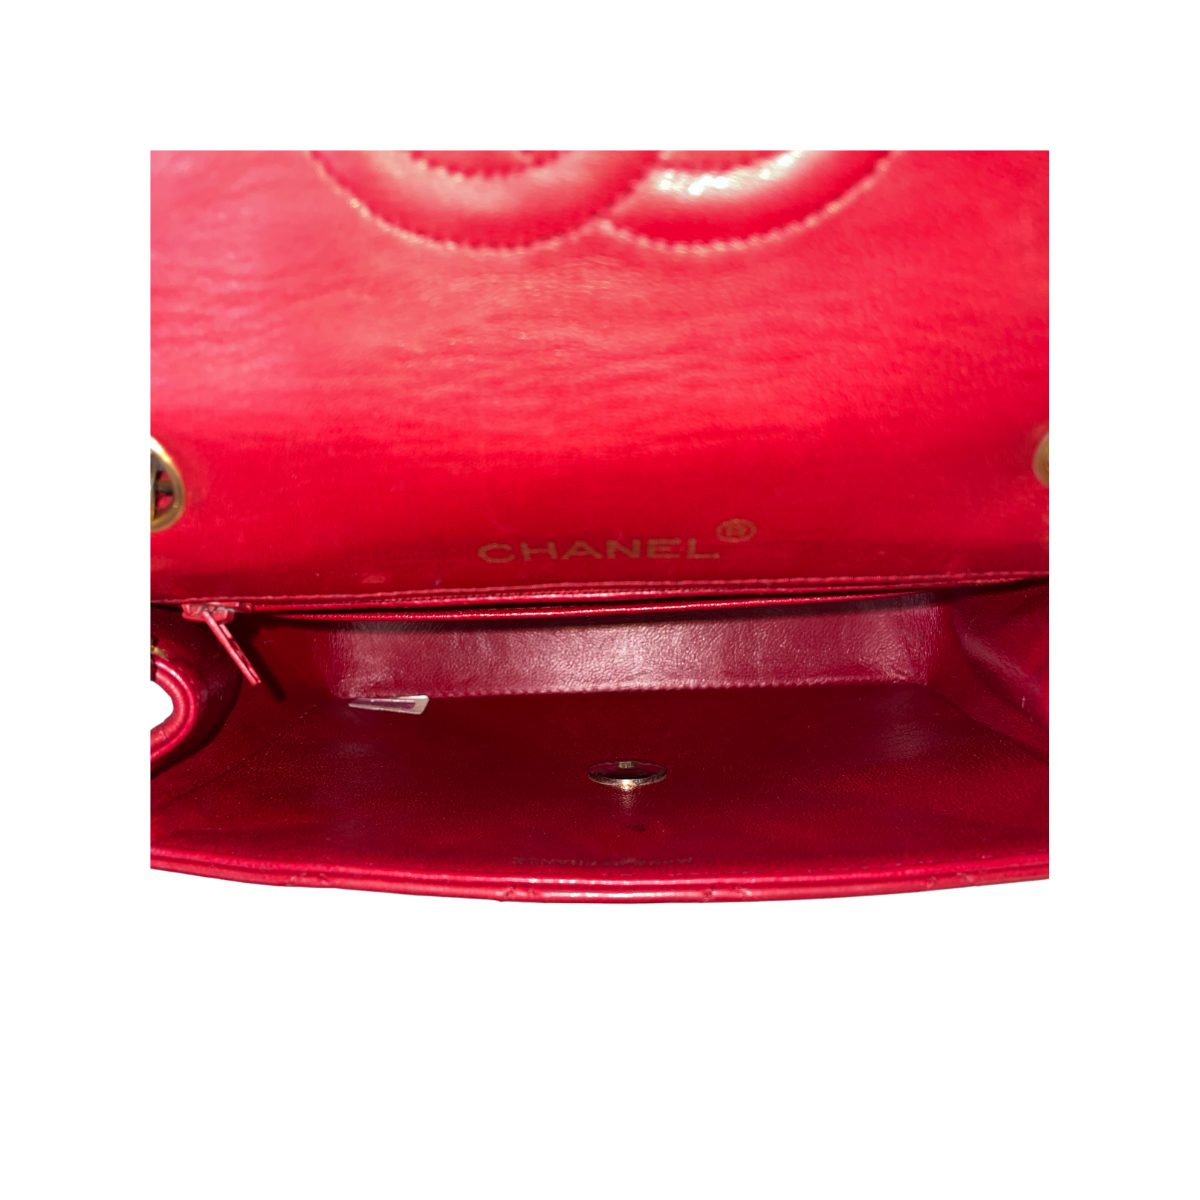 Chanel - Authenticated Timeless/Classique Handbag - Leather Red Plain for Women, Very Good Condition